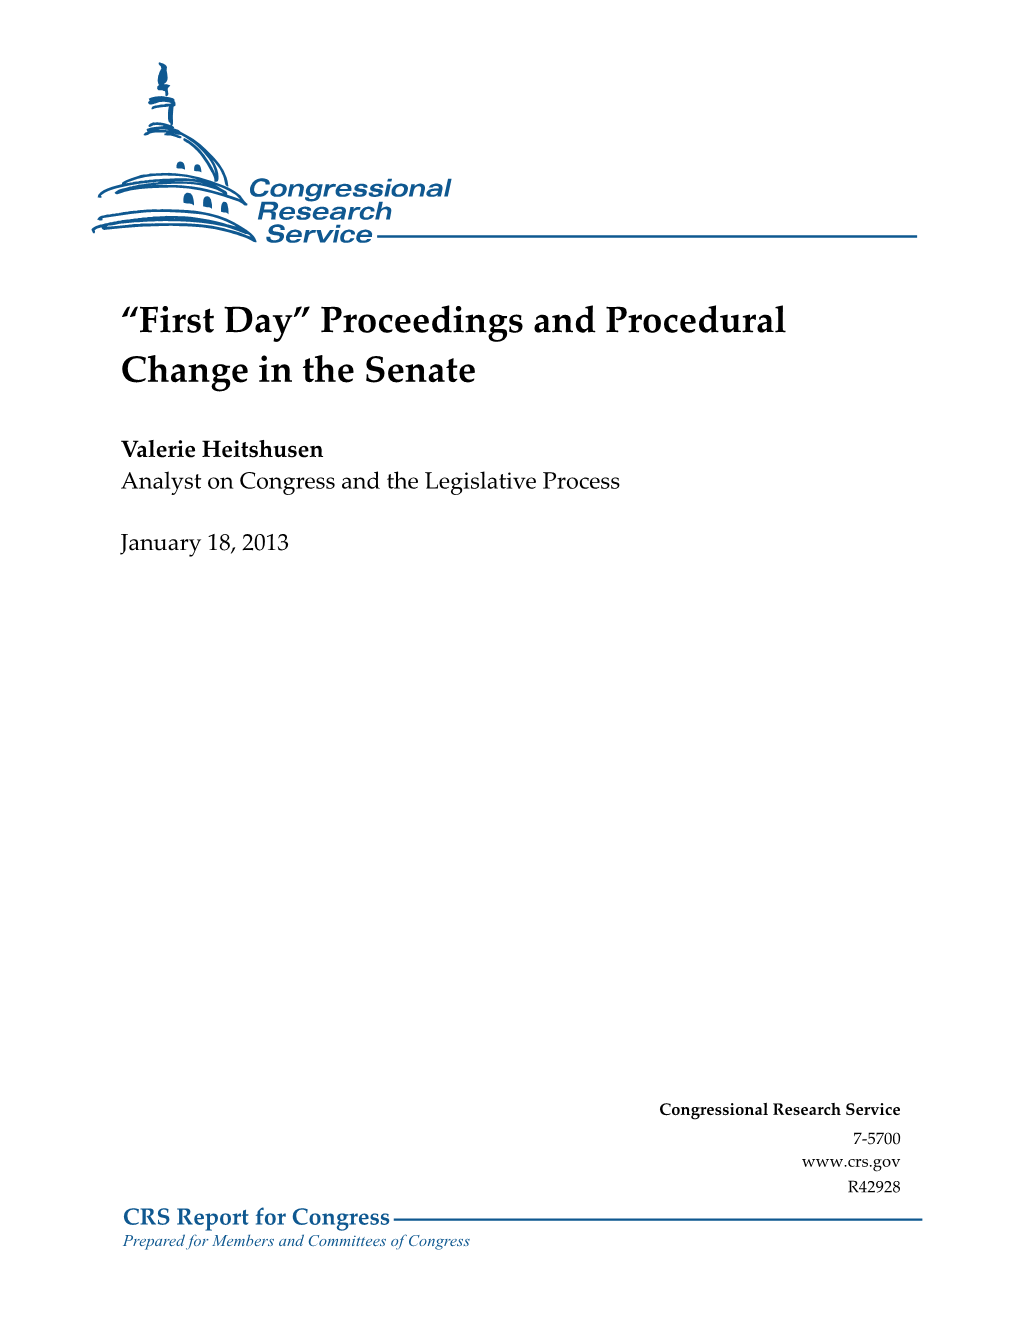 "First Day" Proceedings and Procedural Change in the Senate